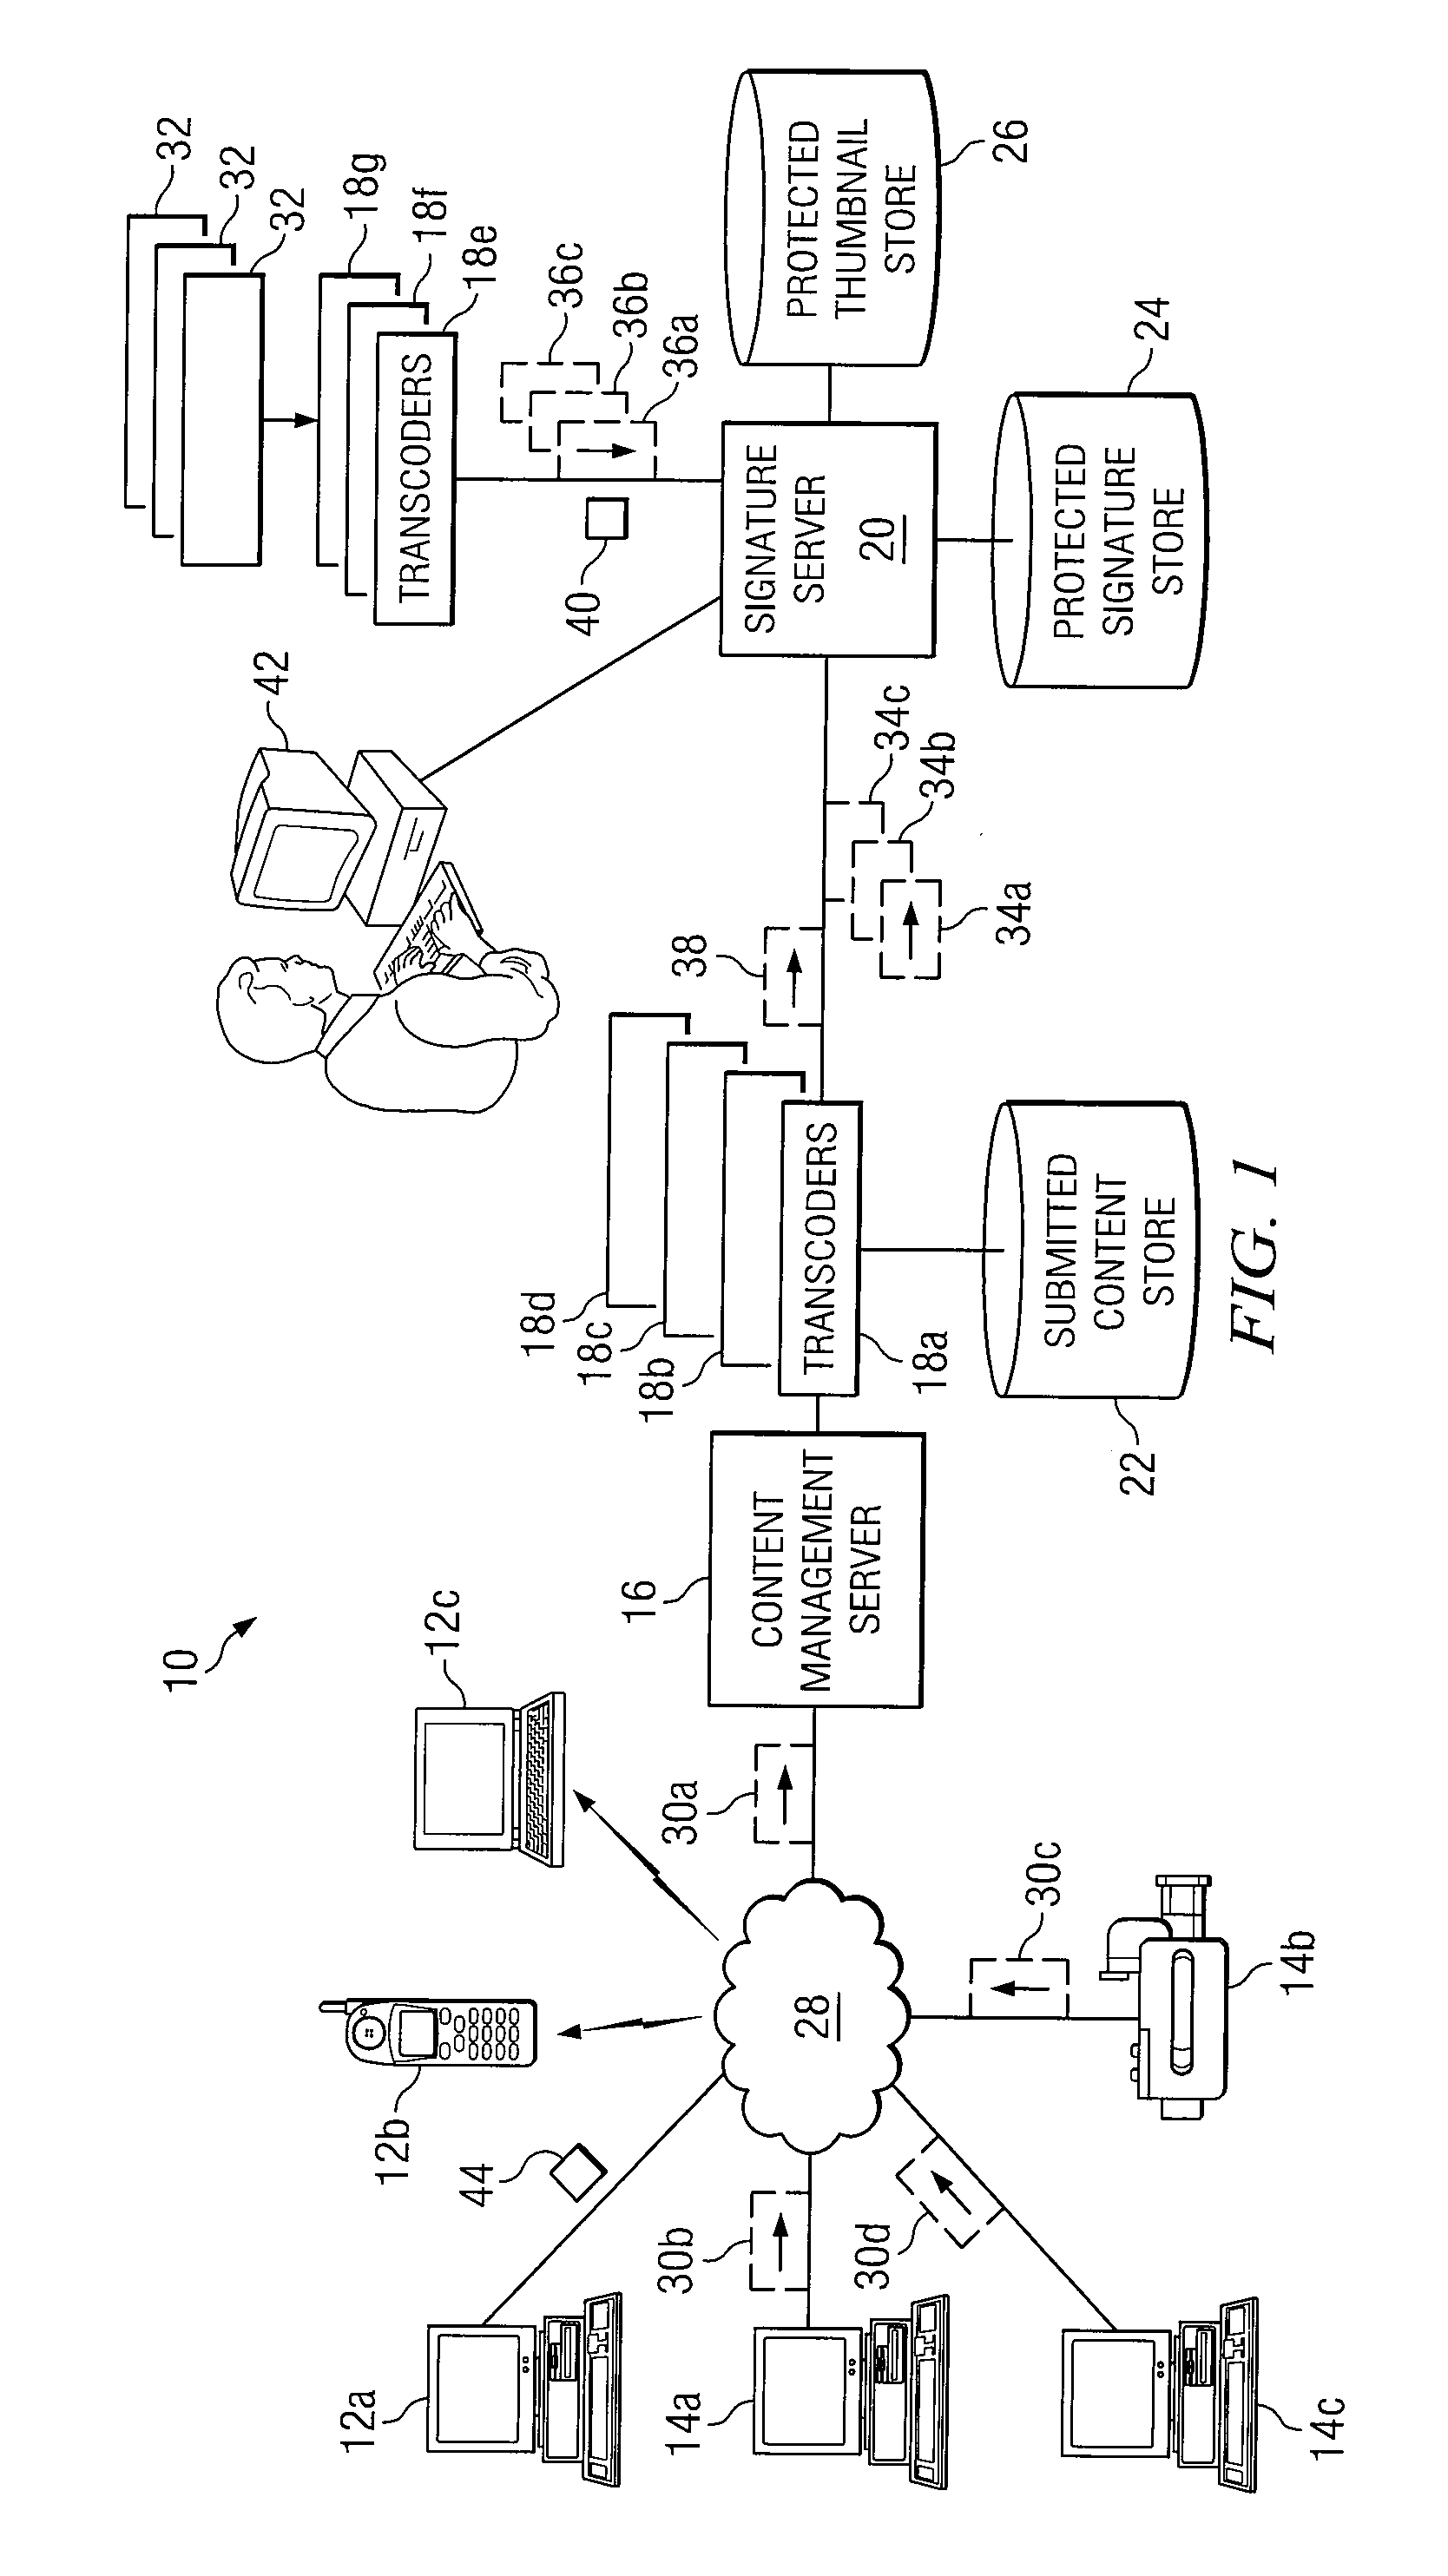 System and Method for Monitoring Content